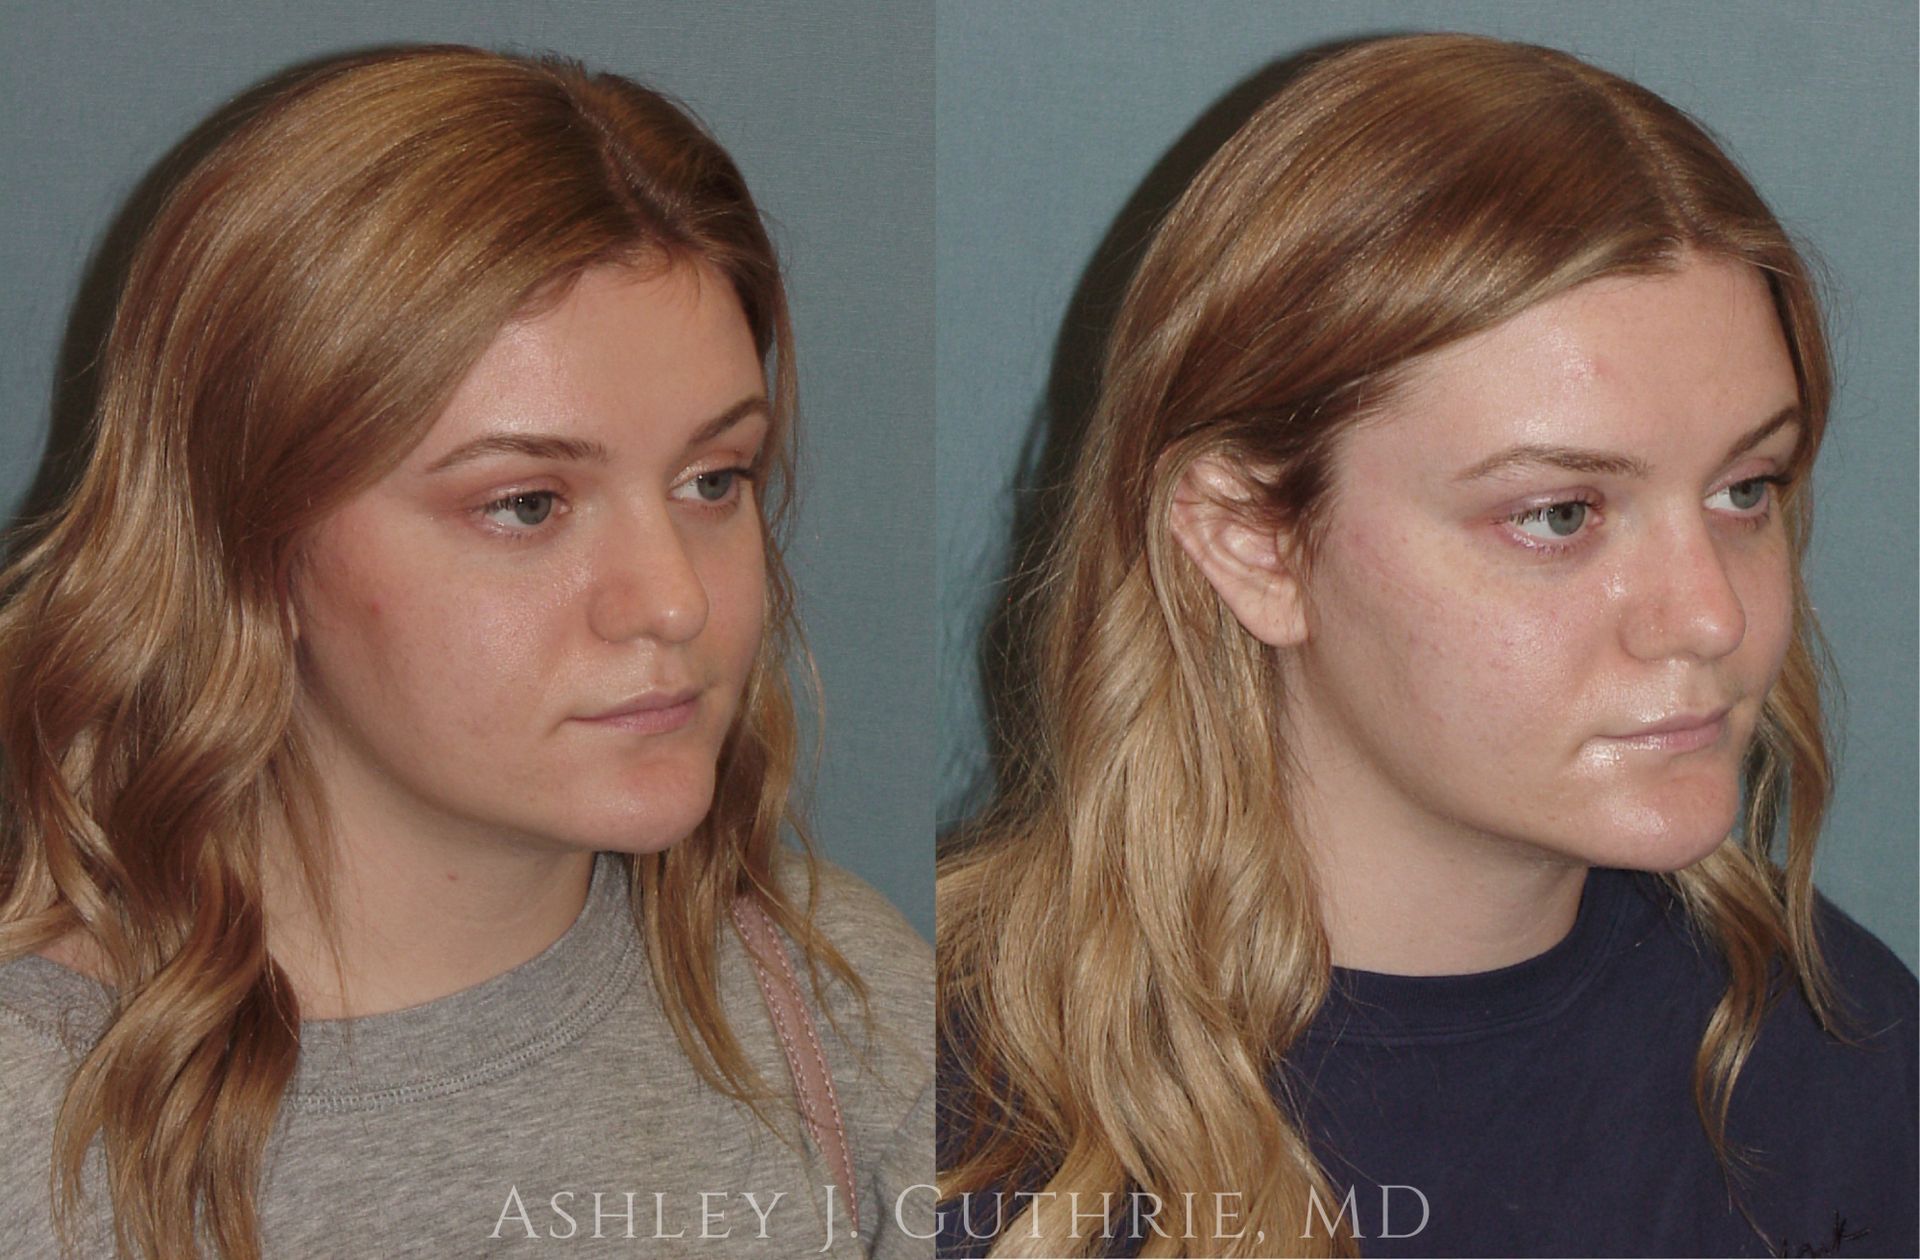 young woman before and after rhinoplasty procedure